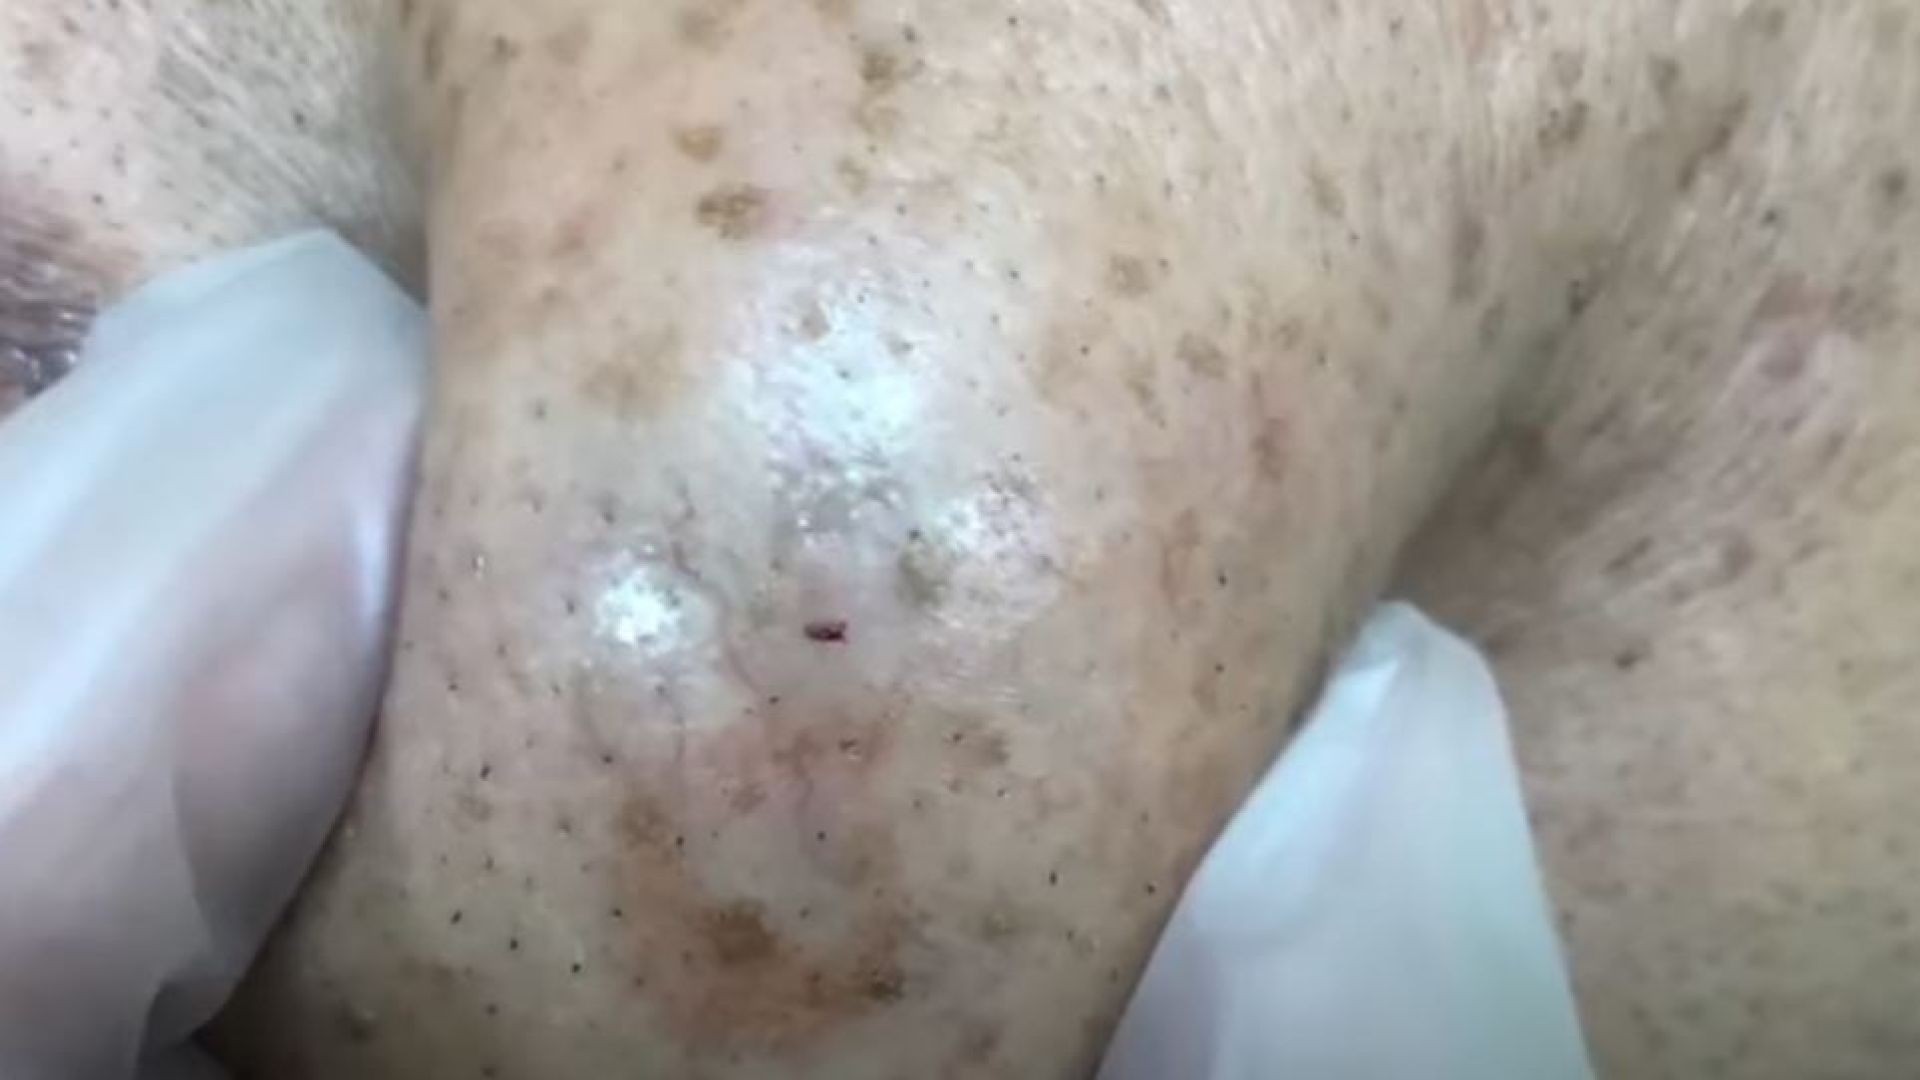 Outstanding Massive Cyst Explosion